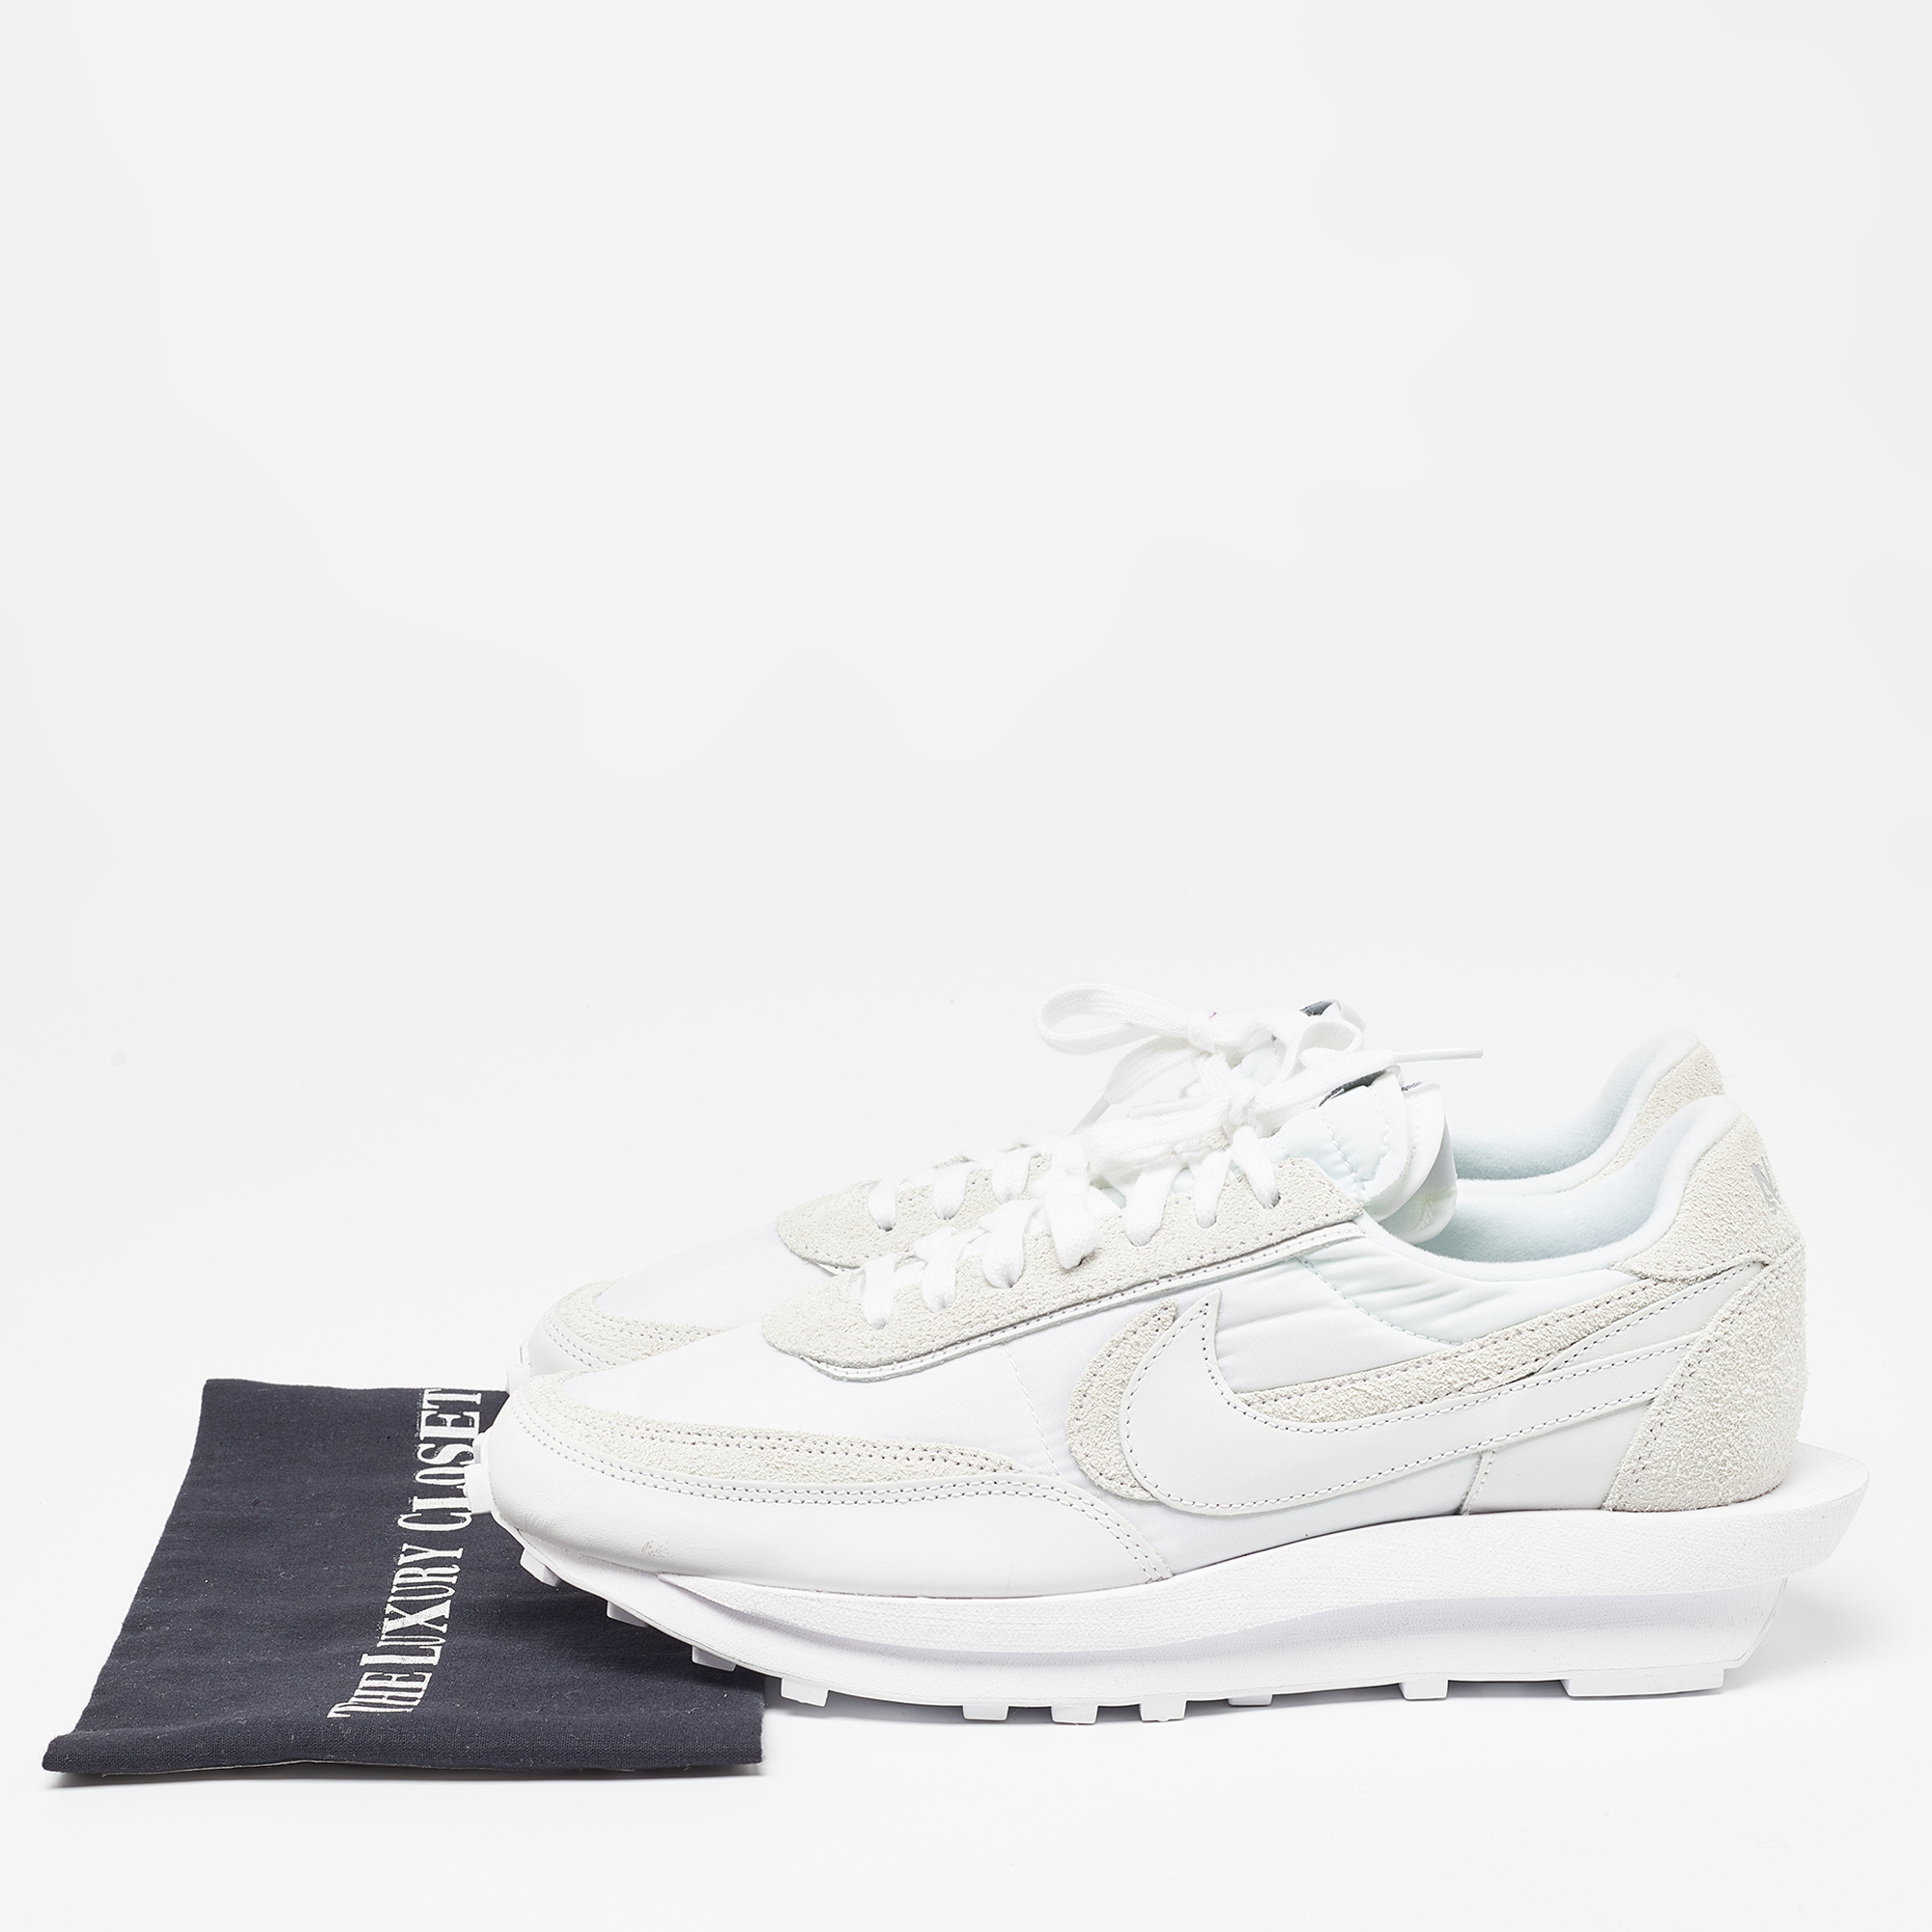 Nike X Sacai White Suede,Leather And Nylon LD Waffle Sneakers Size 46